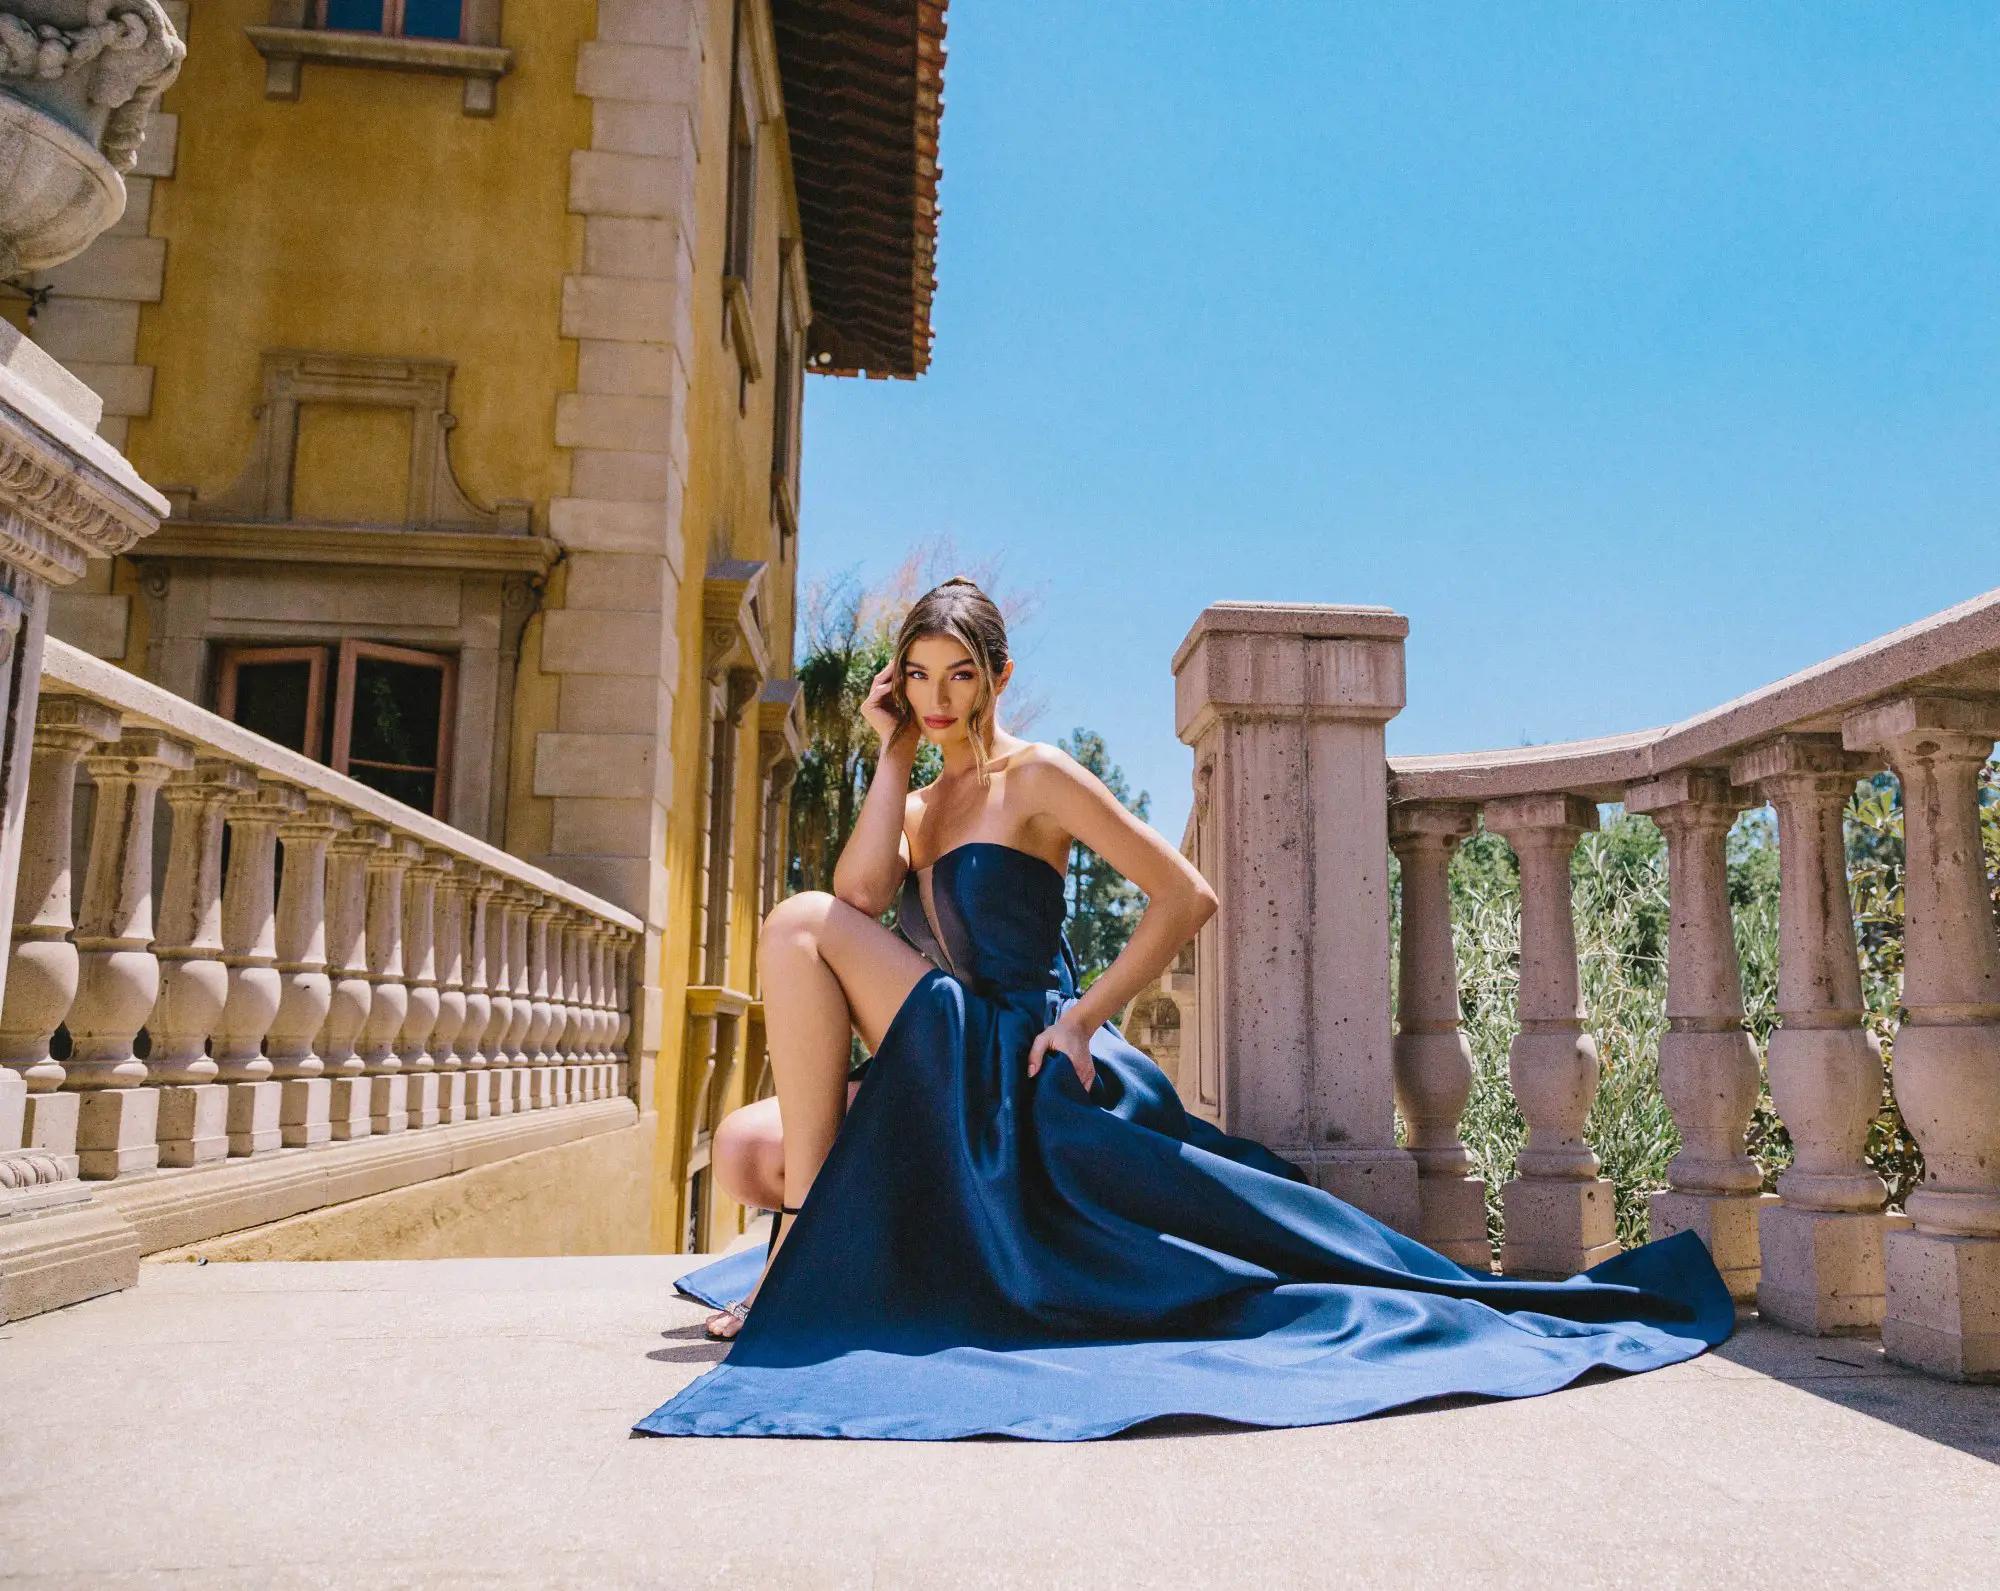 Model wearing a long dark blue evening gown sitting on the floor